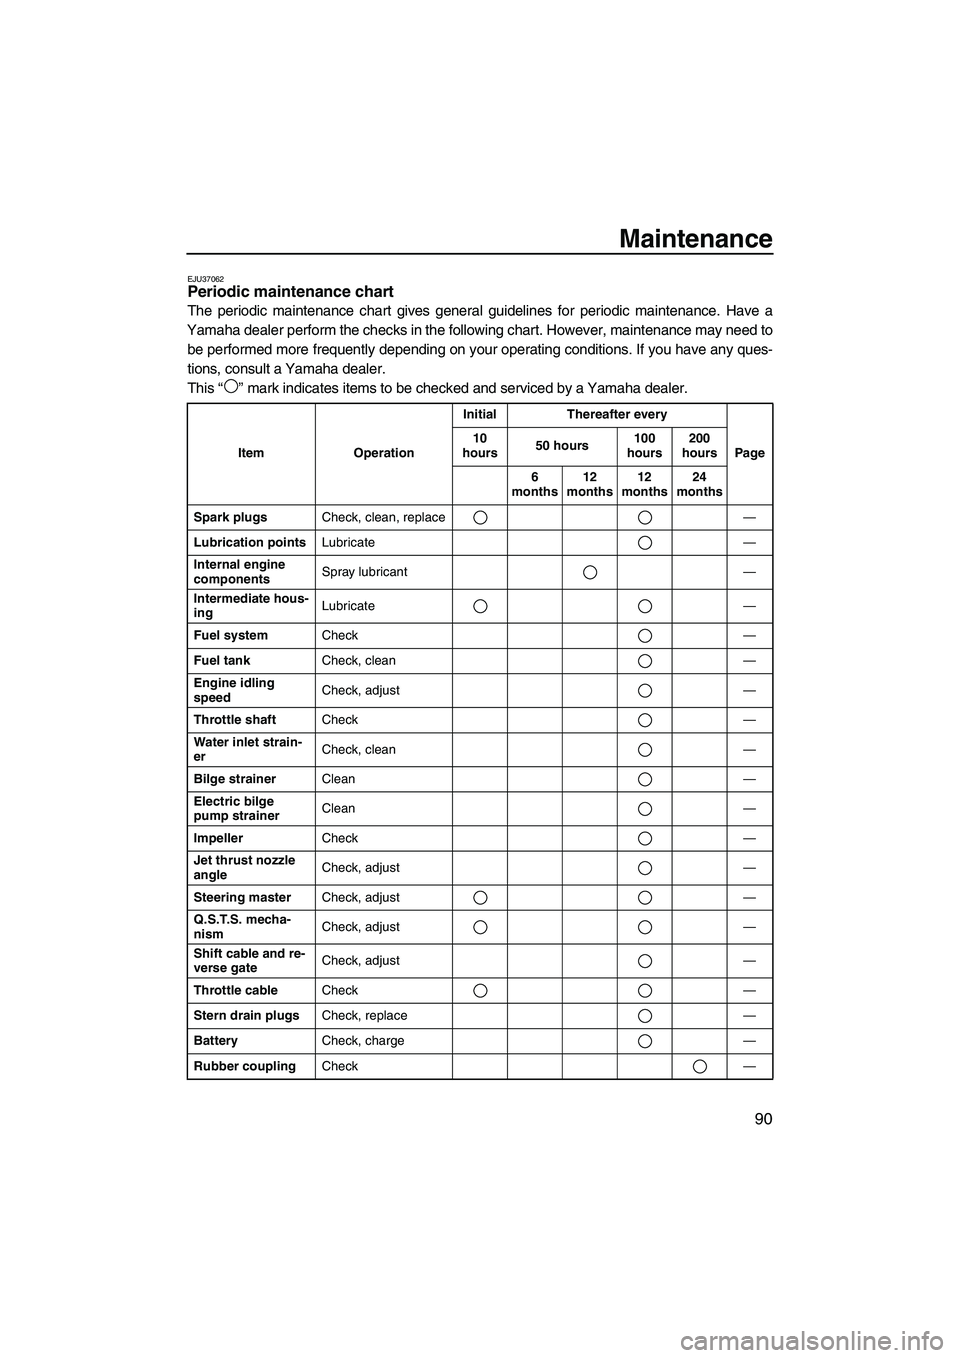 YAMAHA FX HO 2010  Owners Manual Maintenance
90
EJU37062Periodic maintenance chart 
The periodic maintenance chart gives general guidelines for periodic maintenance. Have a
Yamaha dealer perform the checks in the following chart. How